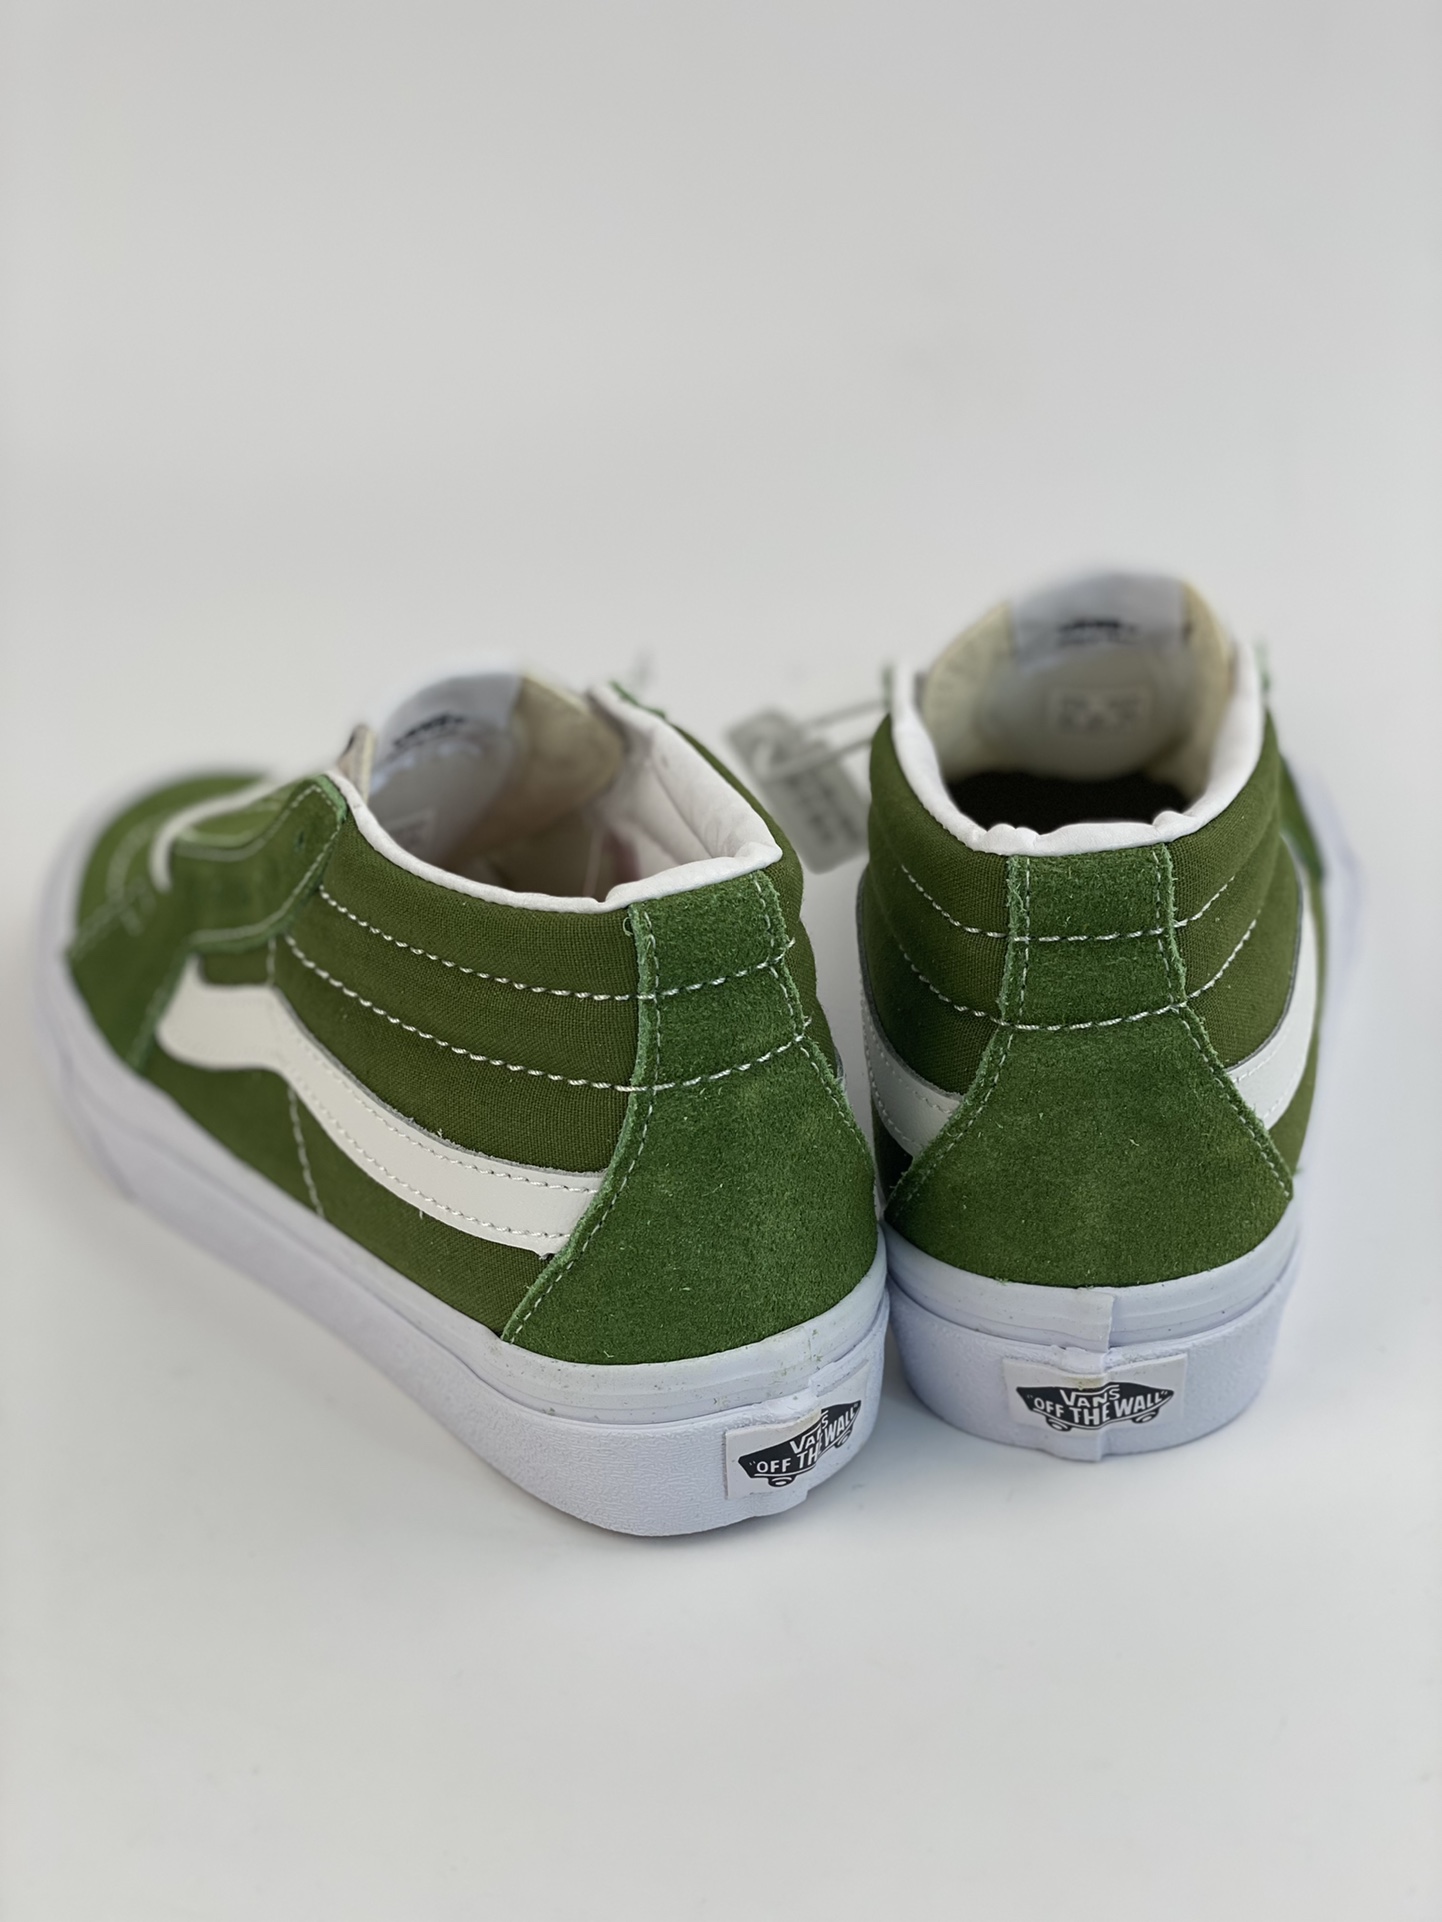 VANS SK8-MID Matcha Green mid-top is made of high-quality suede + canvas material VN0A3WM3609